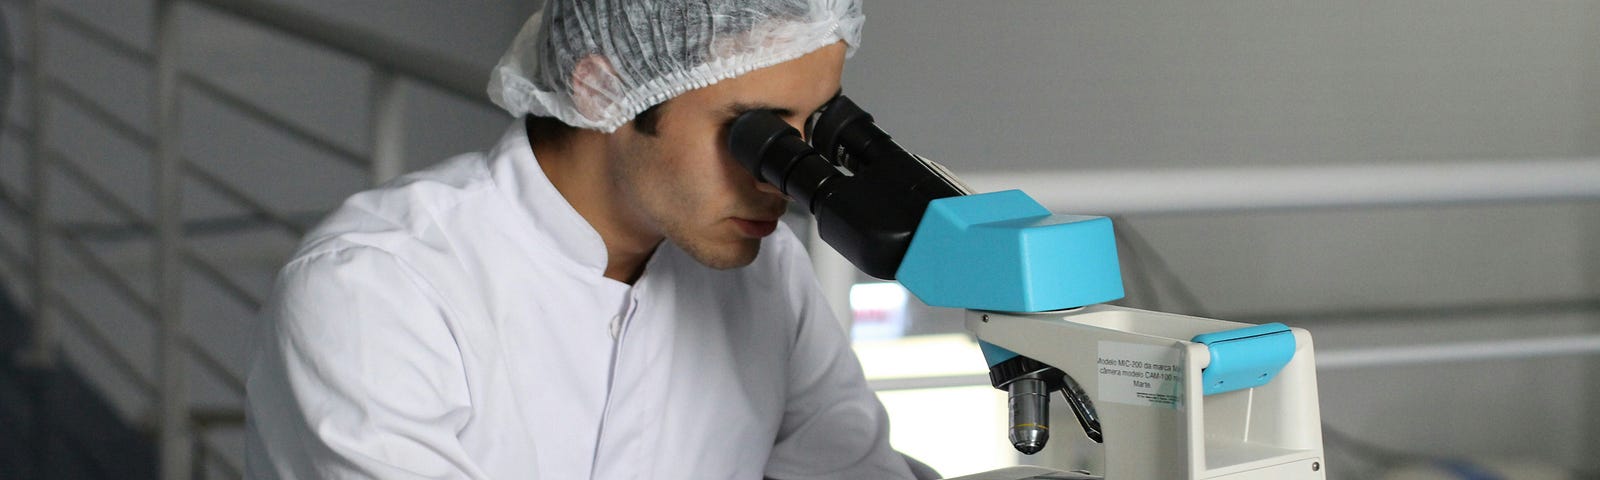 Scientist looking into microscope wearing lab coat